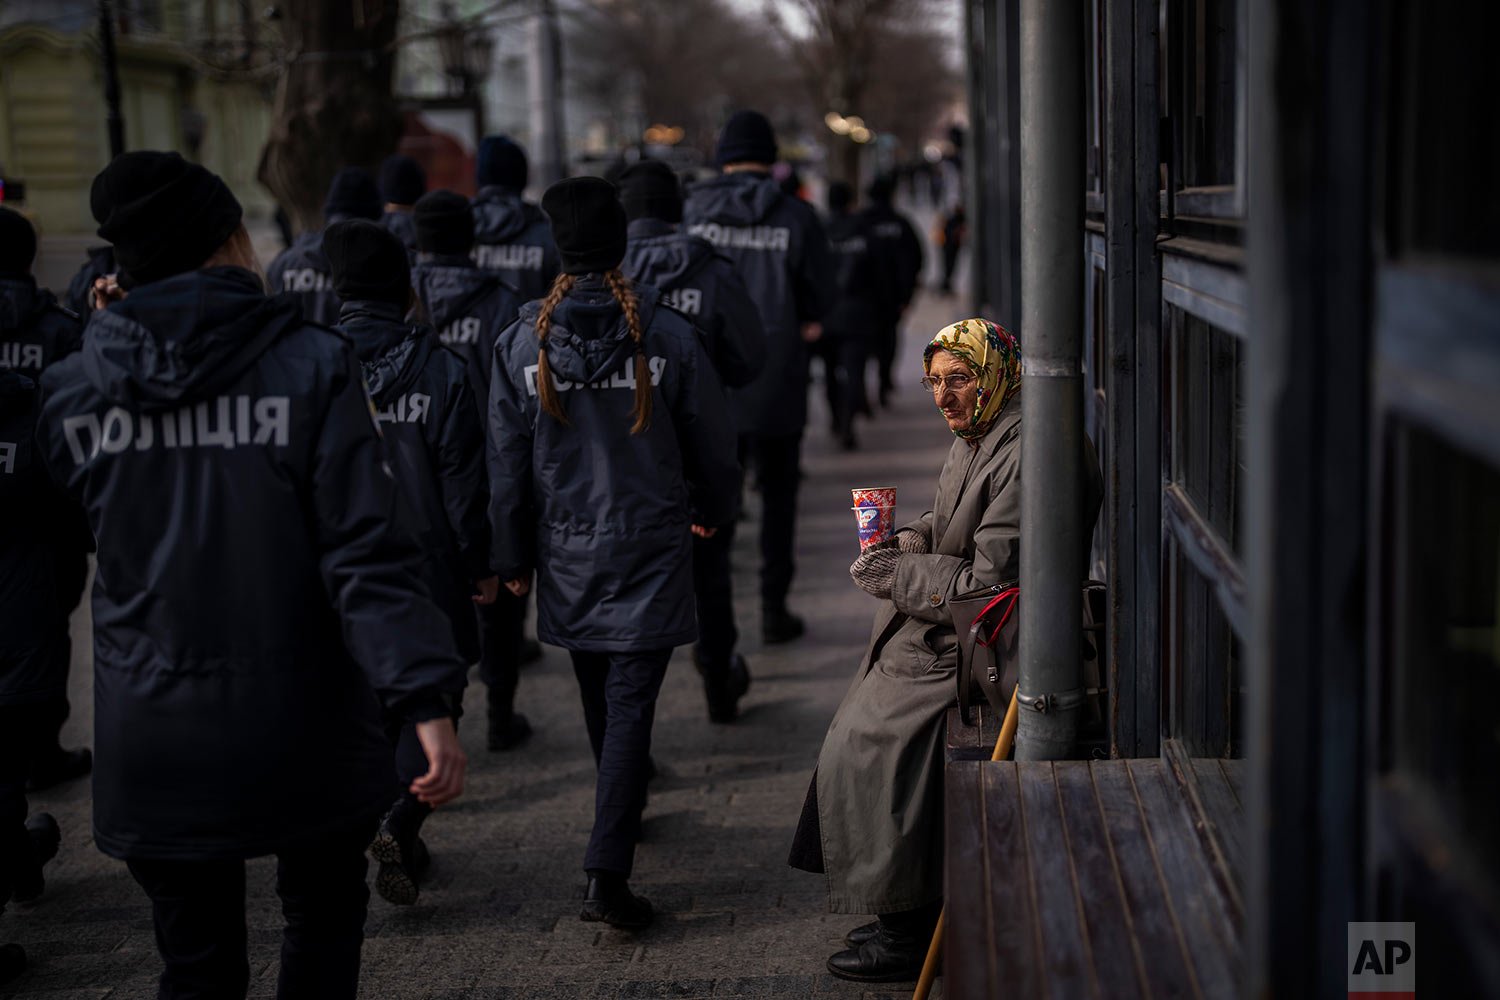  Ukrainian police officers march past a woman begging for alms during a demonstration in Odessa, Ukraine, Sunday, Feb. 20, 2022.  (AP Photo/Emilio Morenatti) 